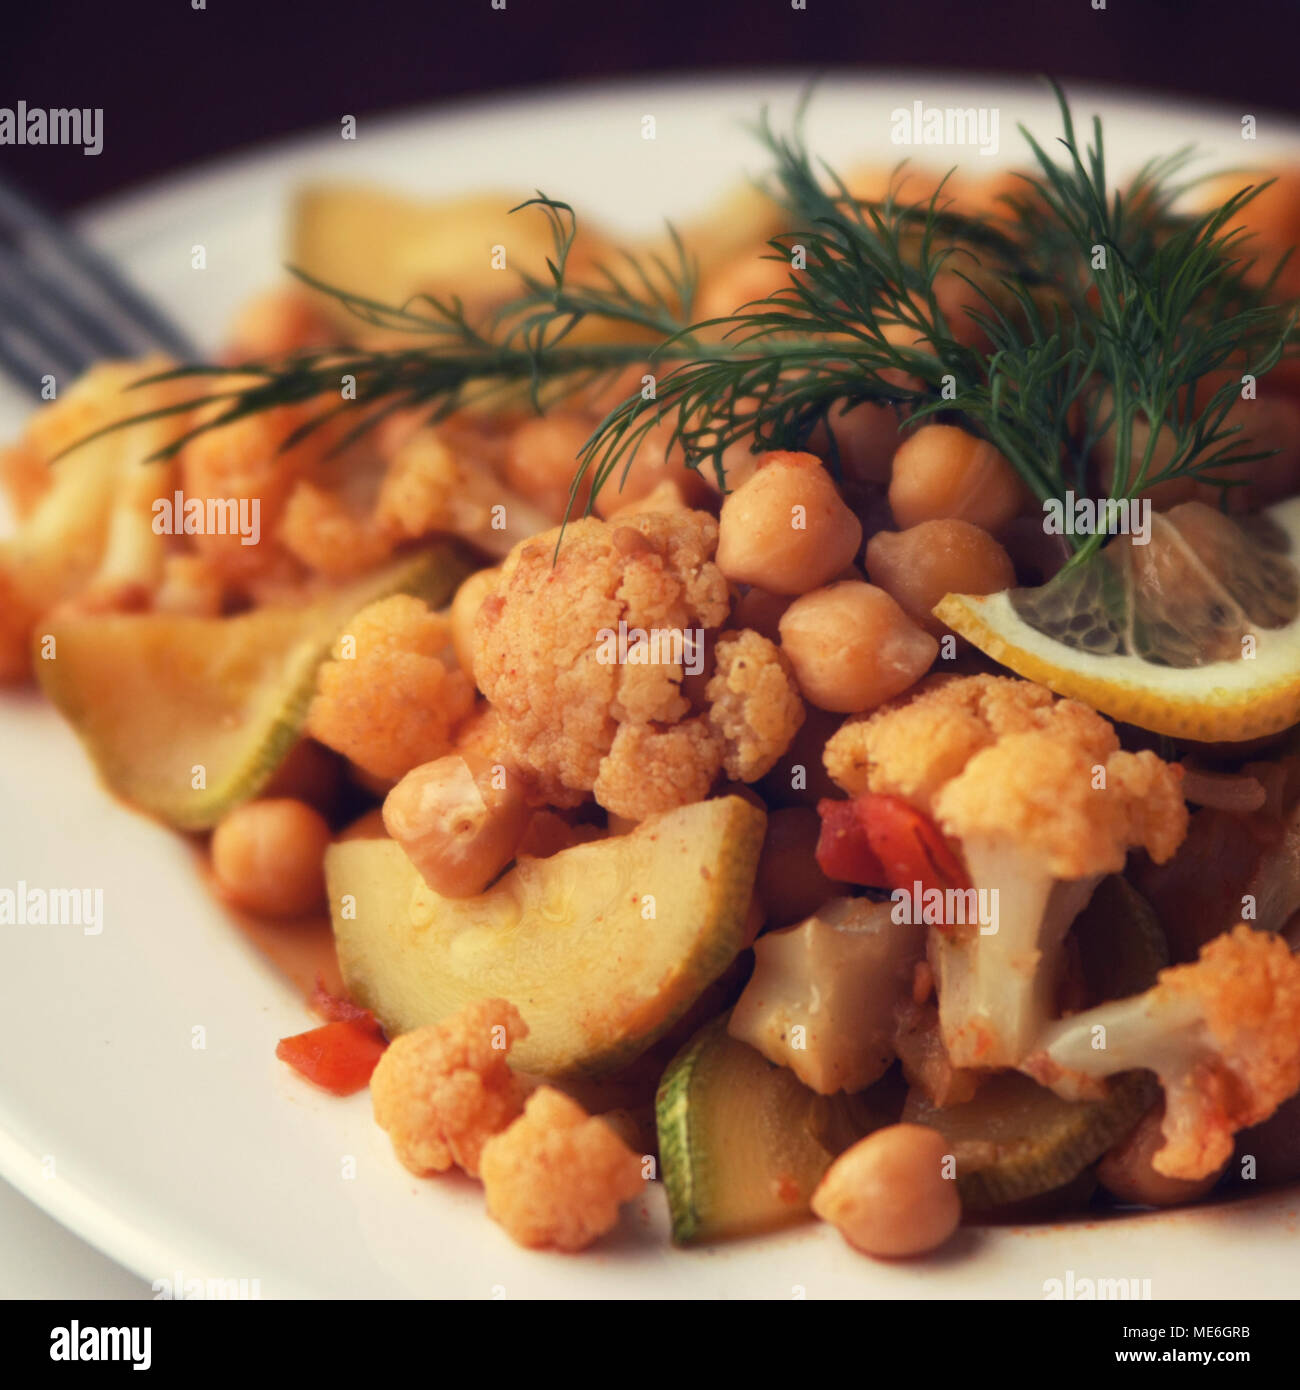 Vegetable stew with chickpeas, cauliflower and cabbages. Organic food. Vegan dish. European cuisine. Vegetarian lunch. Toned photo. Close up. Stock Photo